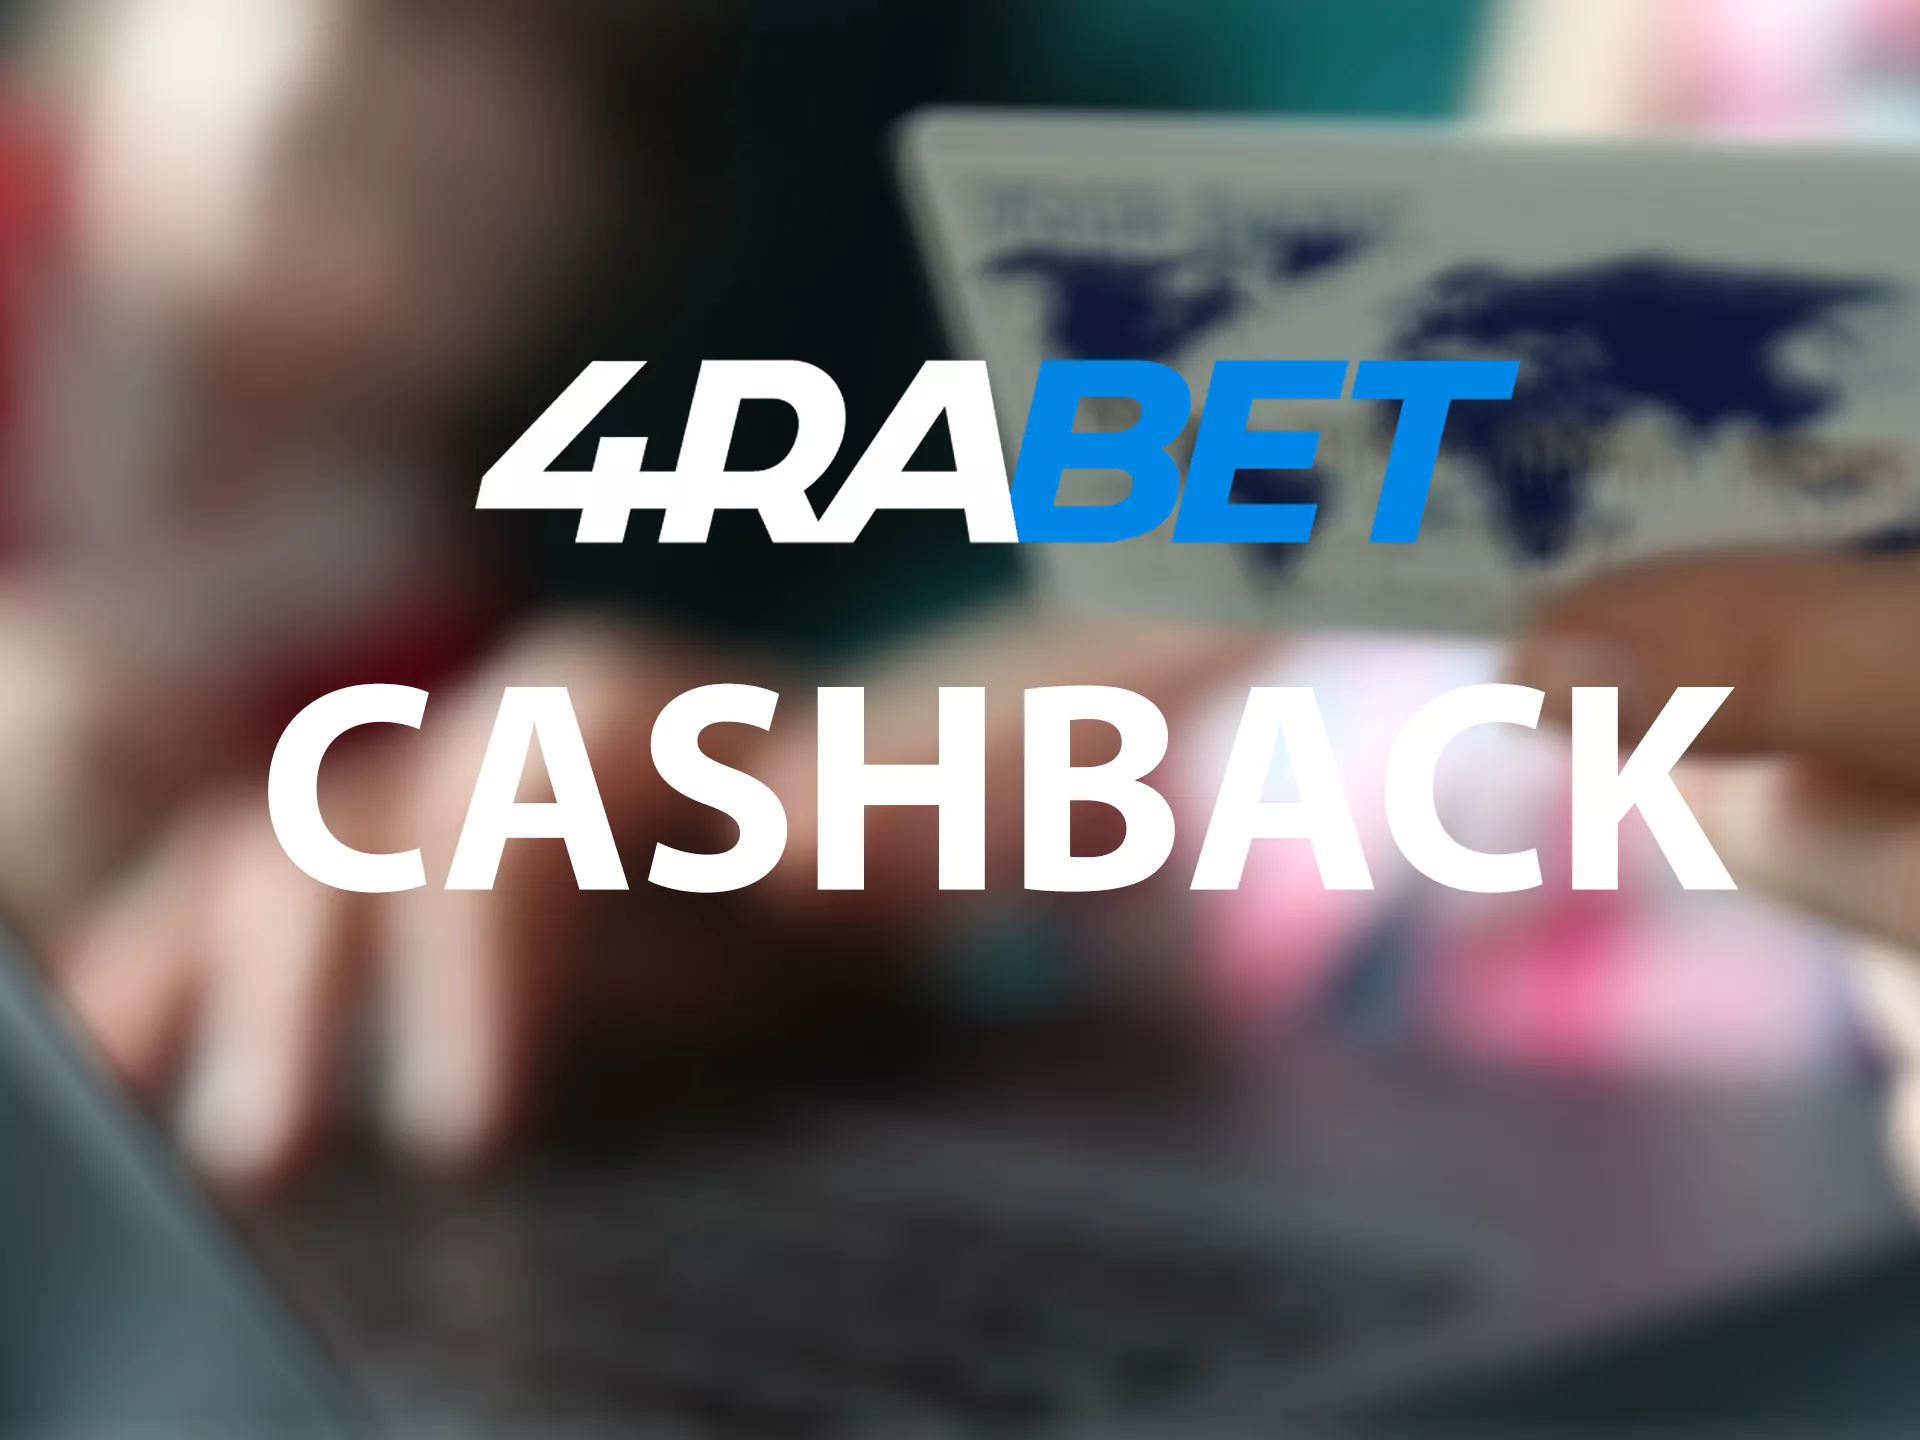 Get a cashback for active betting in 4rabet.